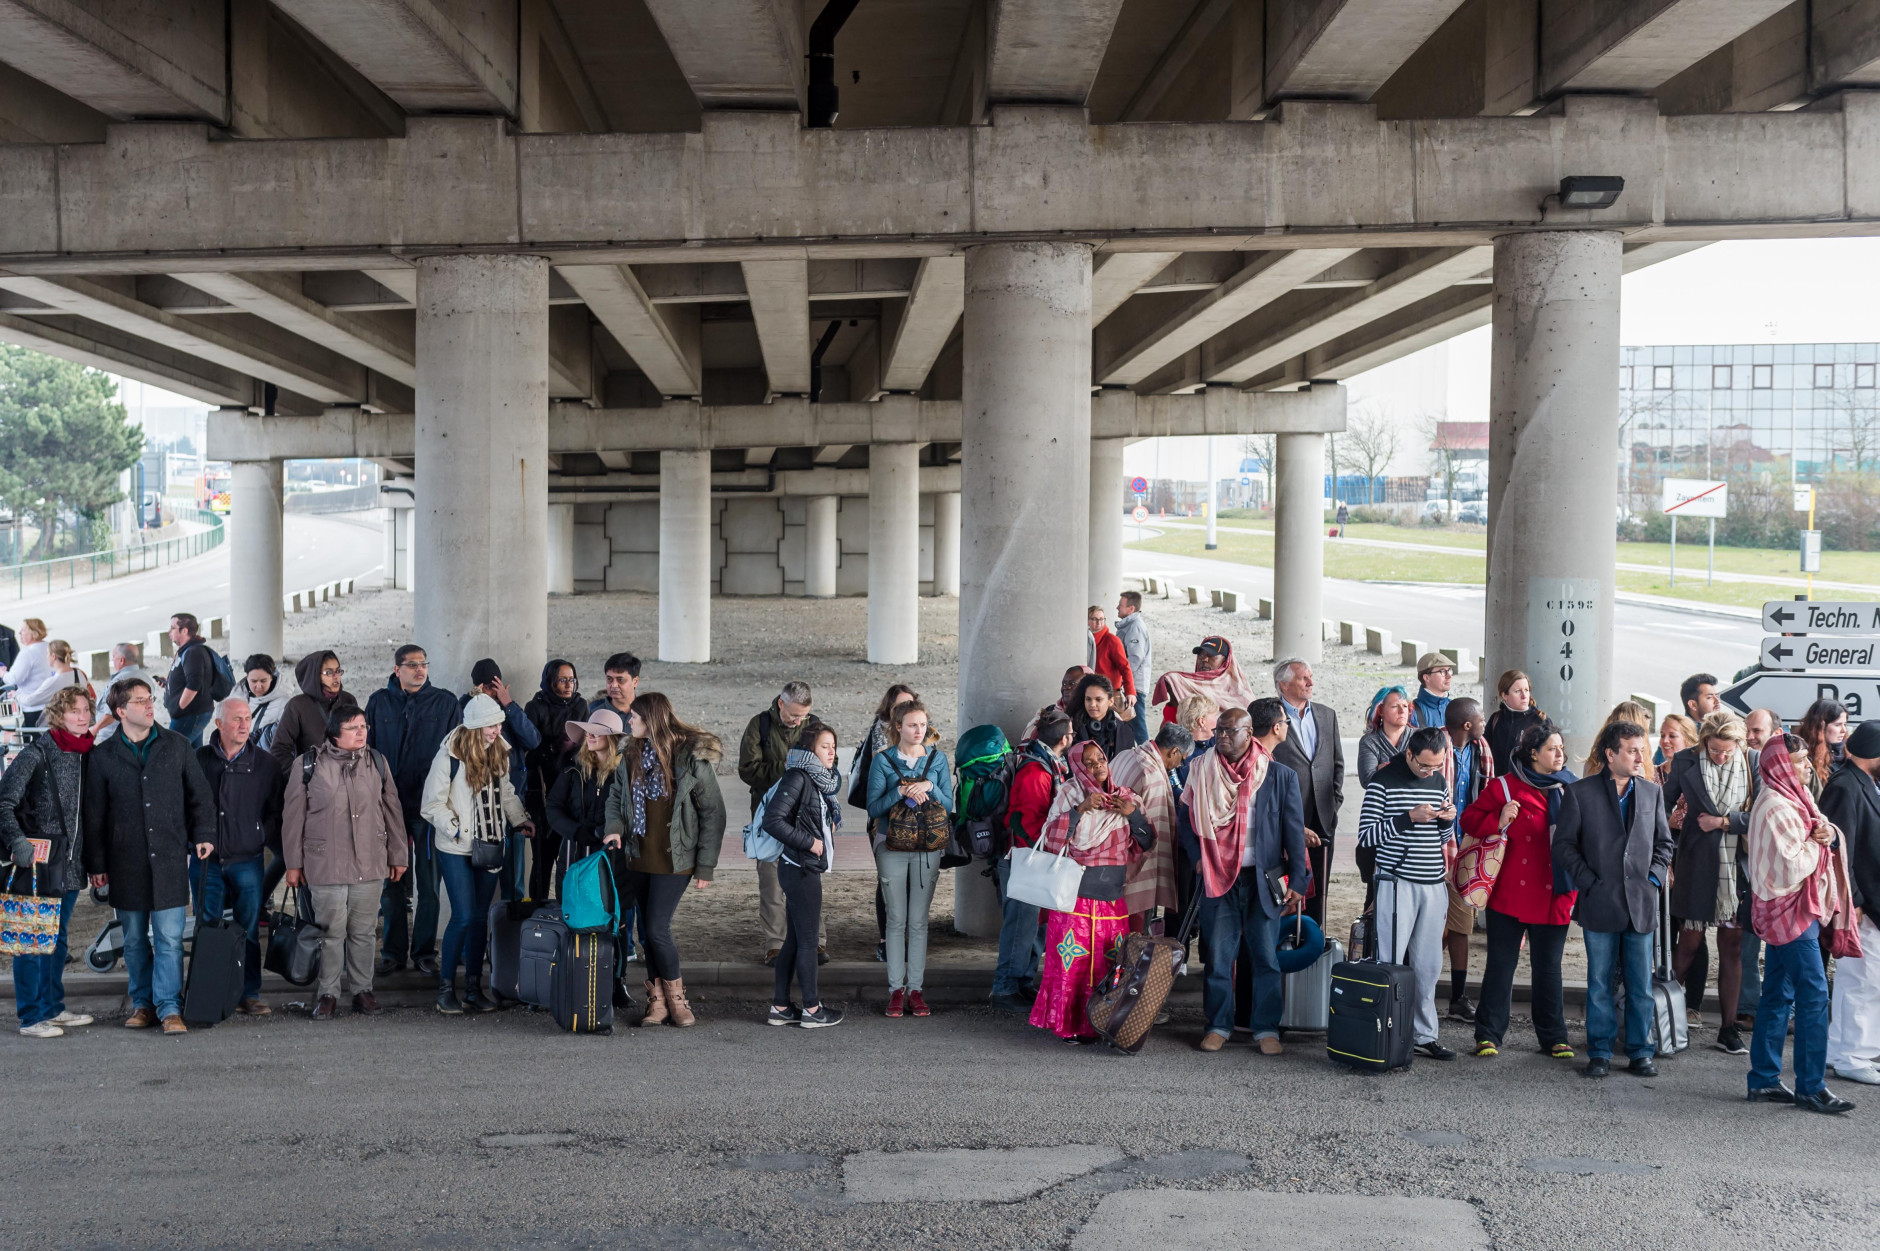 People stand near Brussels airport after being evacuated following  explosions that rocked the facility in Brussels, Belgium, Tuesday March 22, 2016. Authorities locked down the Belgian capital on Tuesday after explosions rocked the Brussels airport and subway system, killing  a number of people and injuring many more. Belgium raised its terror alert to its highest level, diverting arriving planes and trains and ordering people to stay where they were. Airports across Europe tightened security. (AP Photo/Geert Vanden Wijngaert)